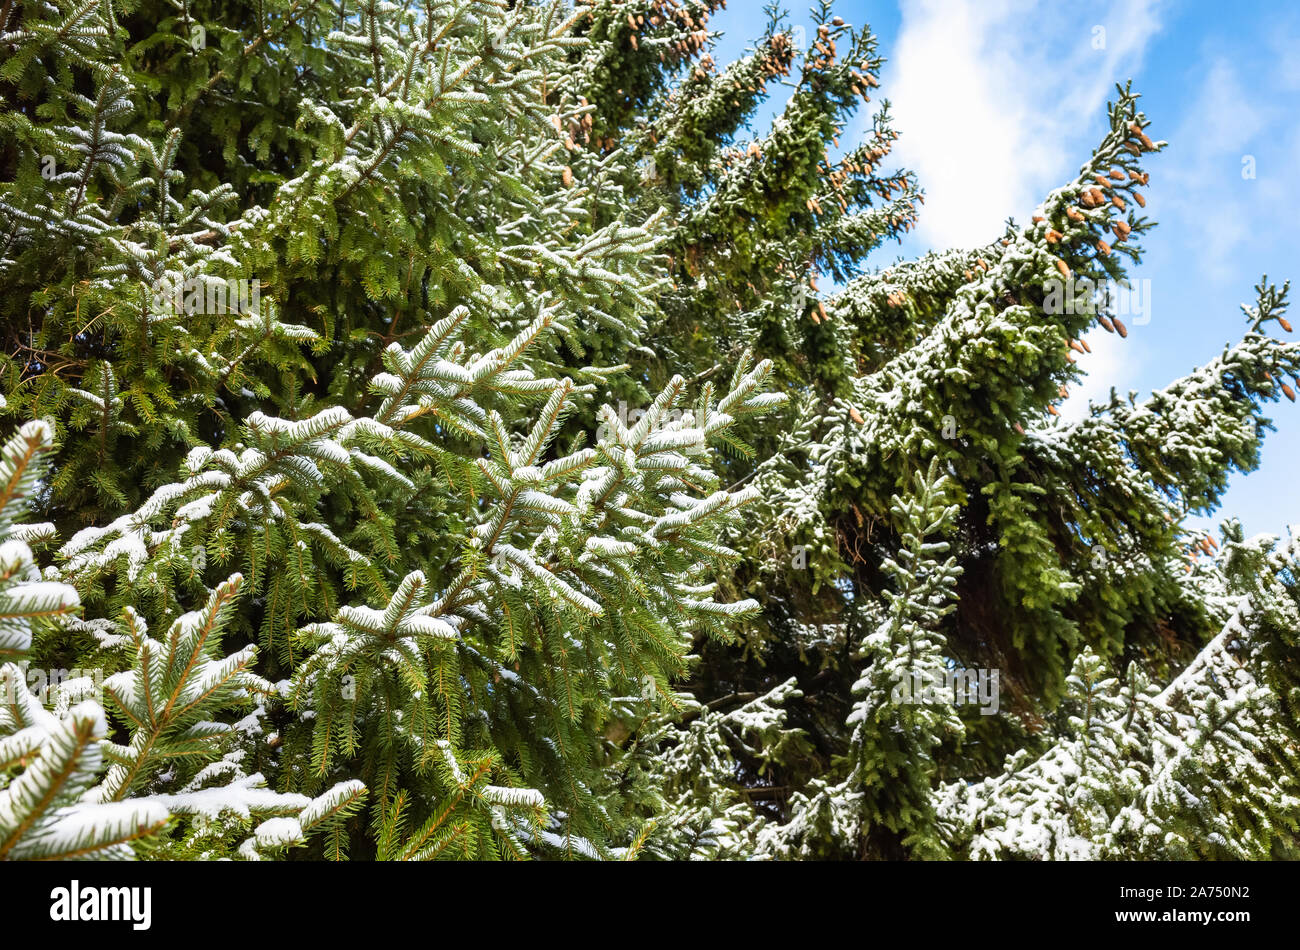 Spruce tree branches covered with snow are under blue cloudy sky, natural winter background Stock Photo